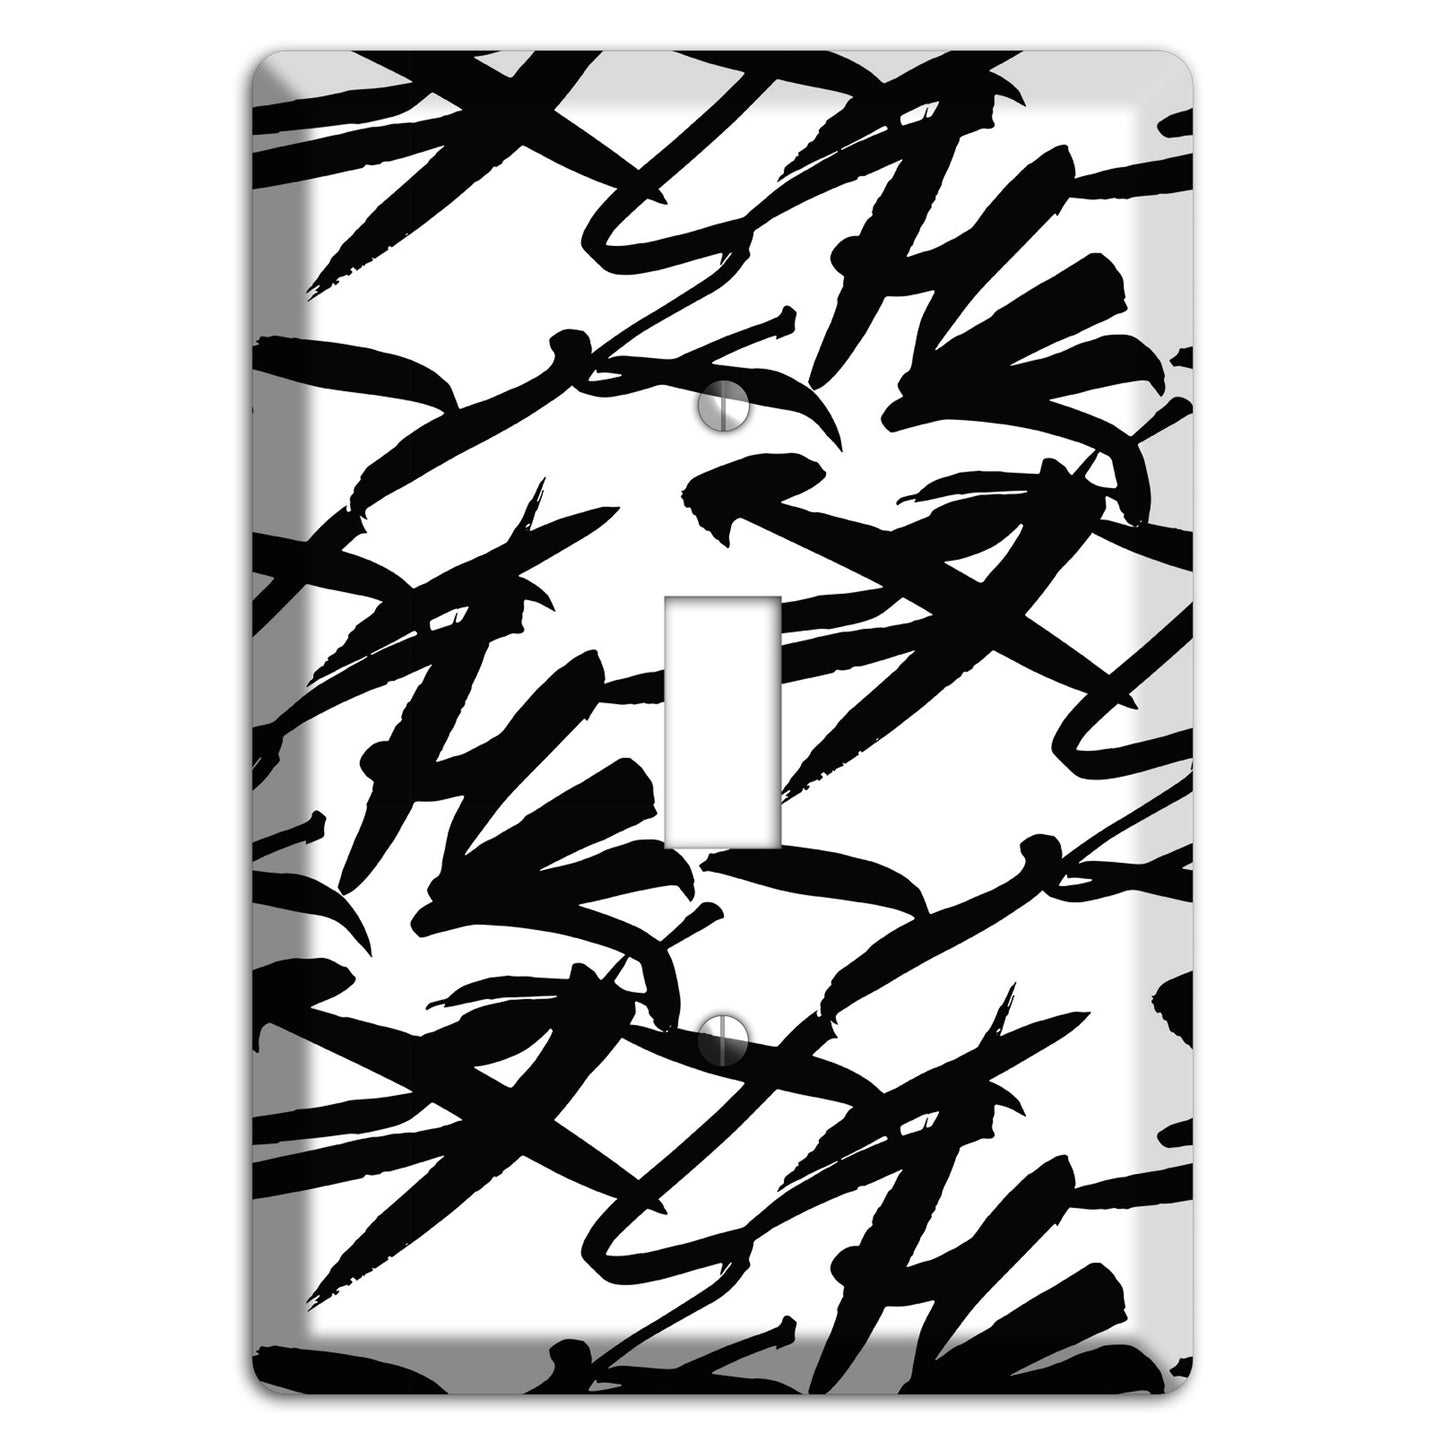 Ink Brushstrokes 2 Cover Plates